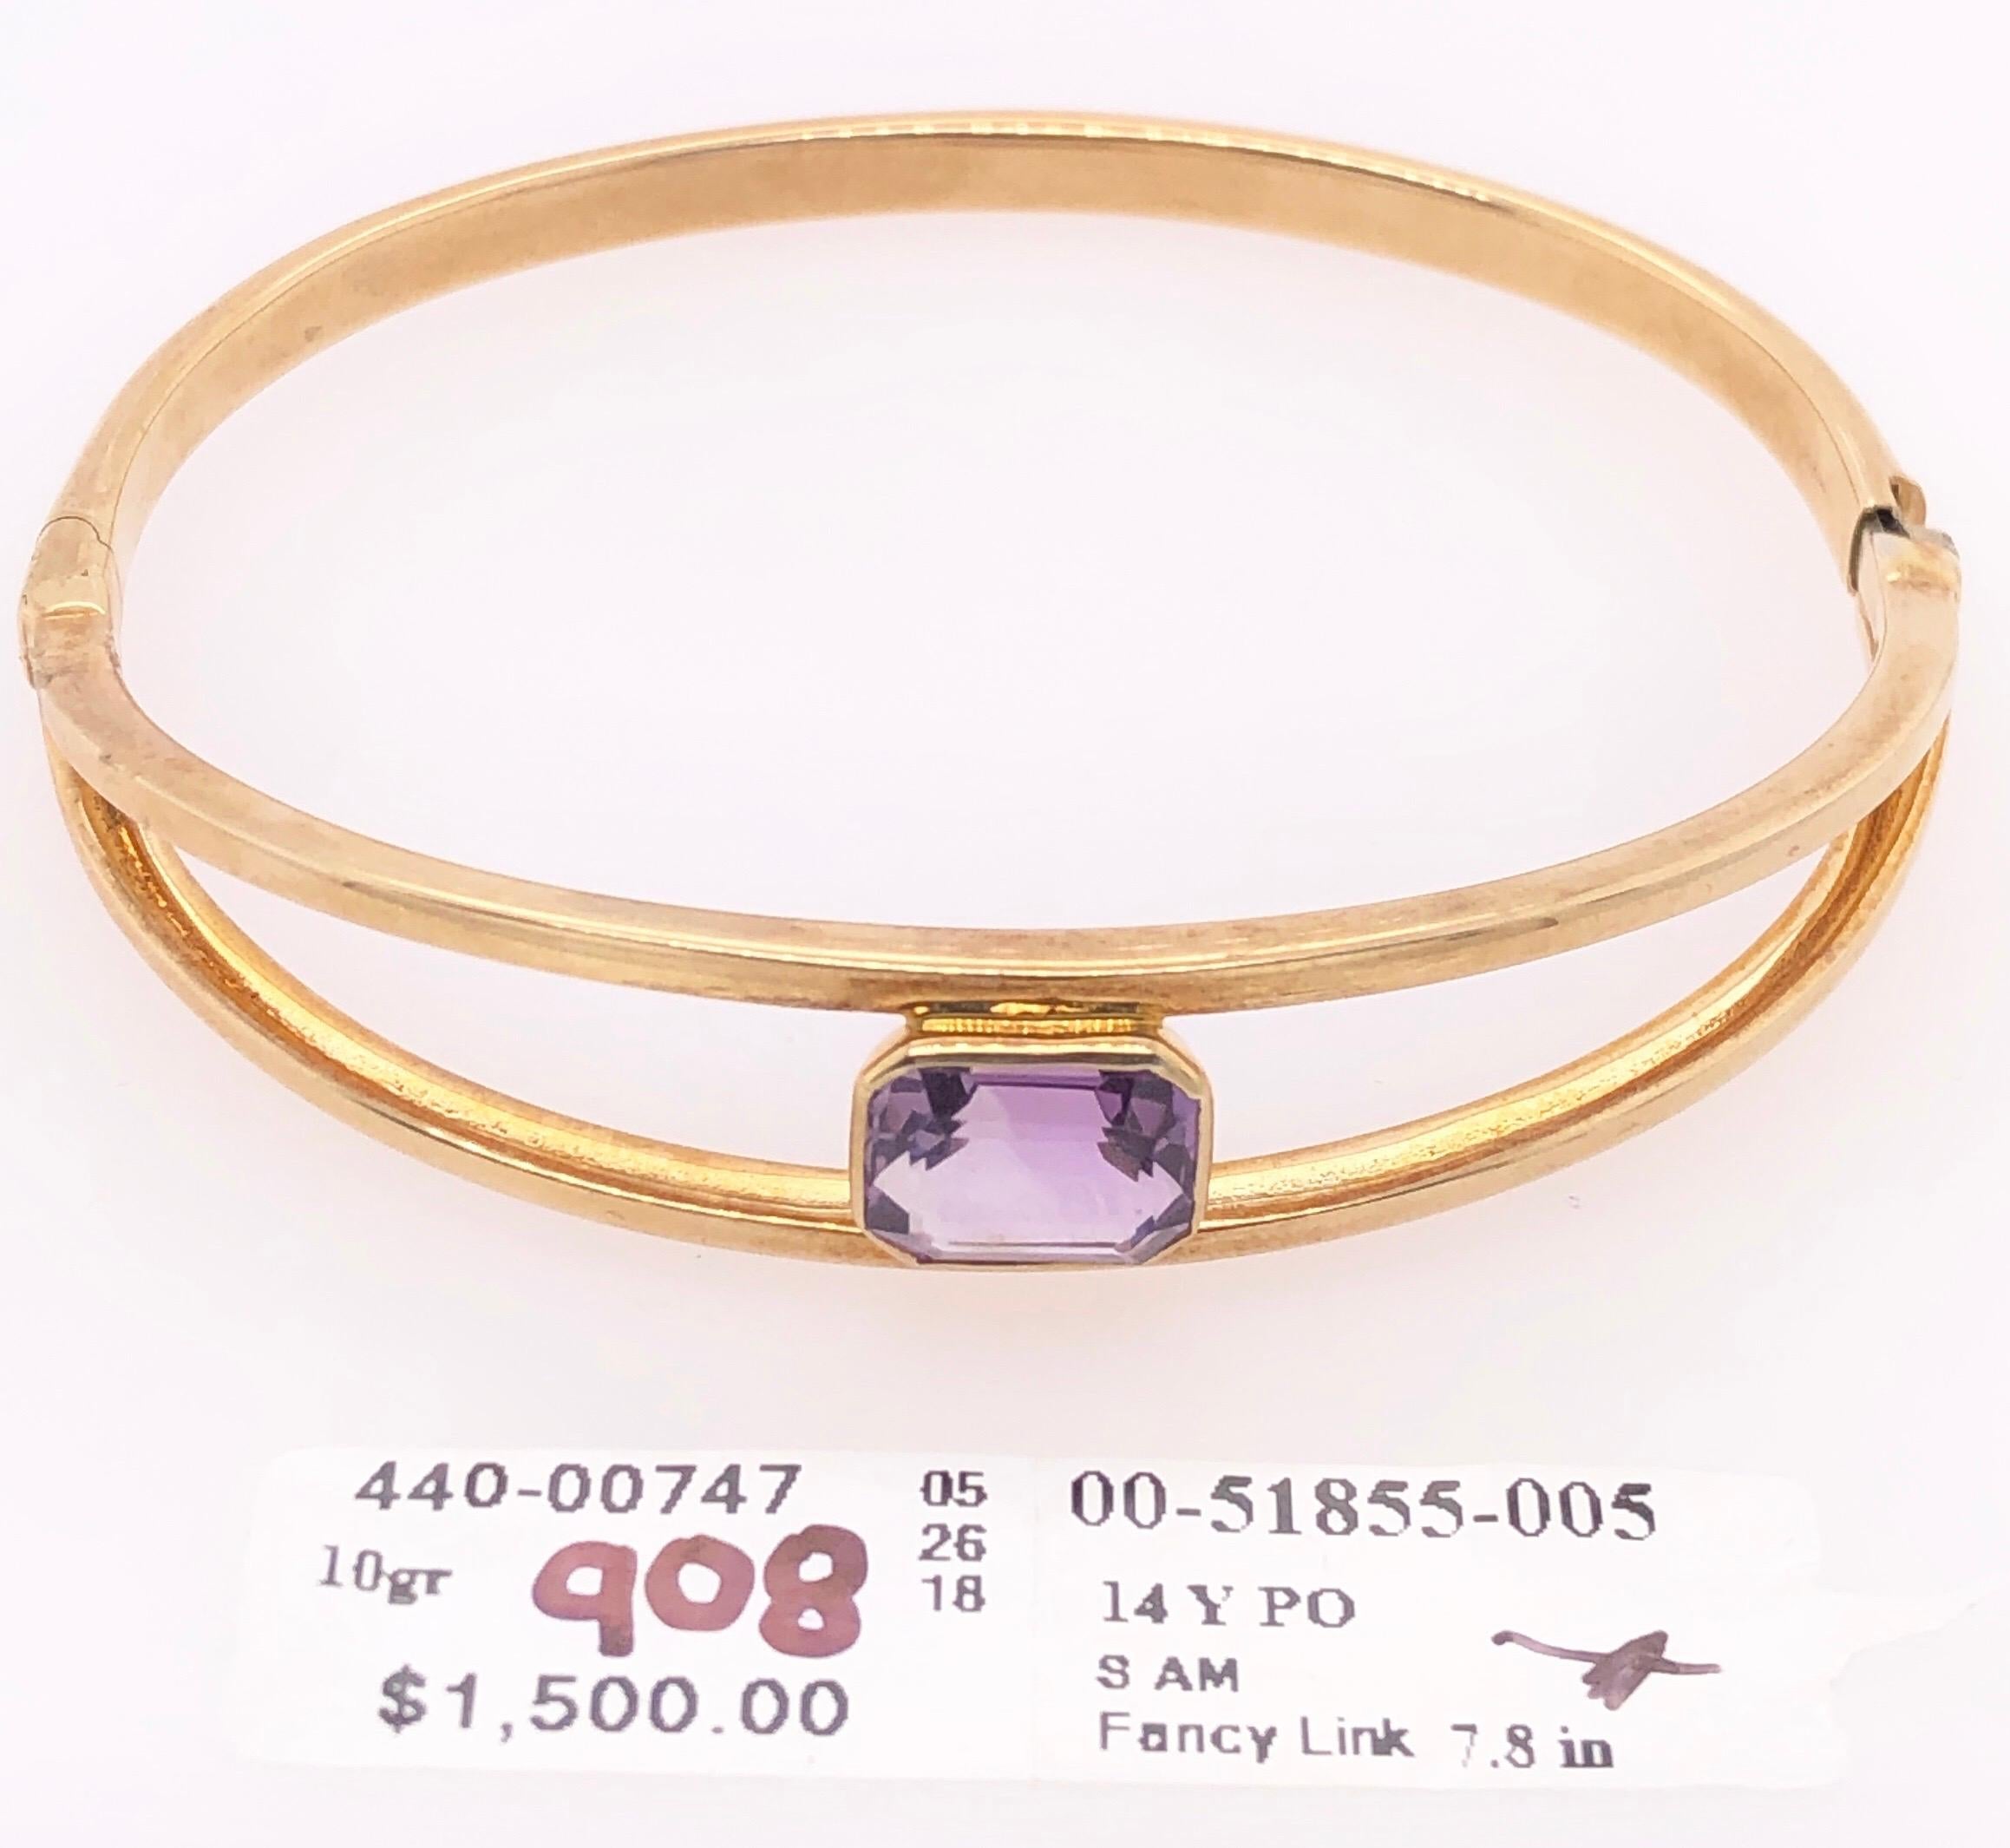 14 Karat Yellow Gold 7.8 Fancy Link Bangle with Square Amethyst Solitaire
10 grams total weight.